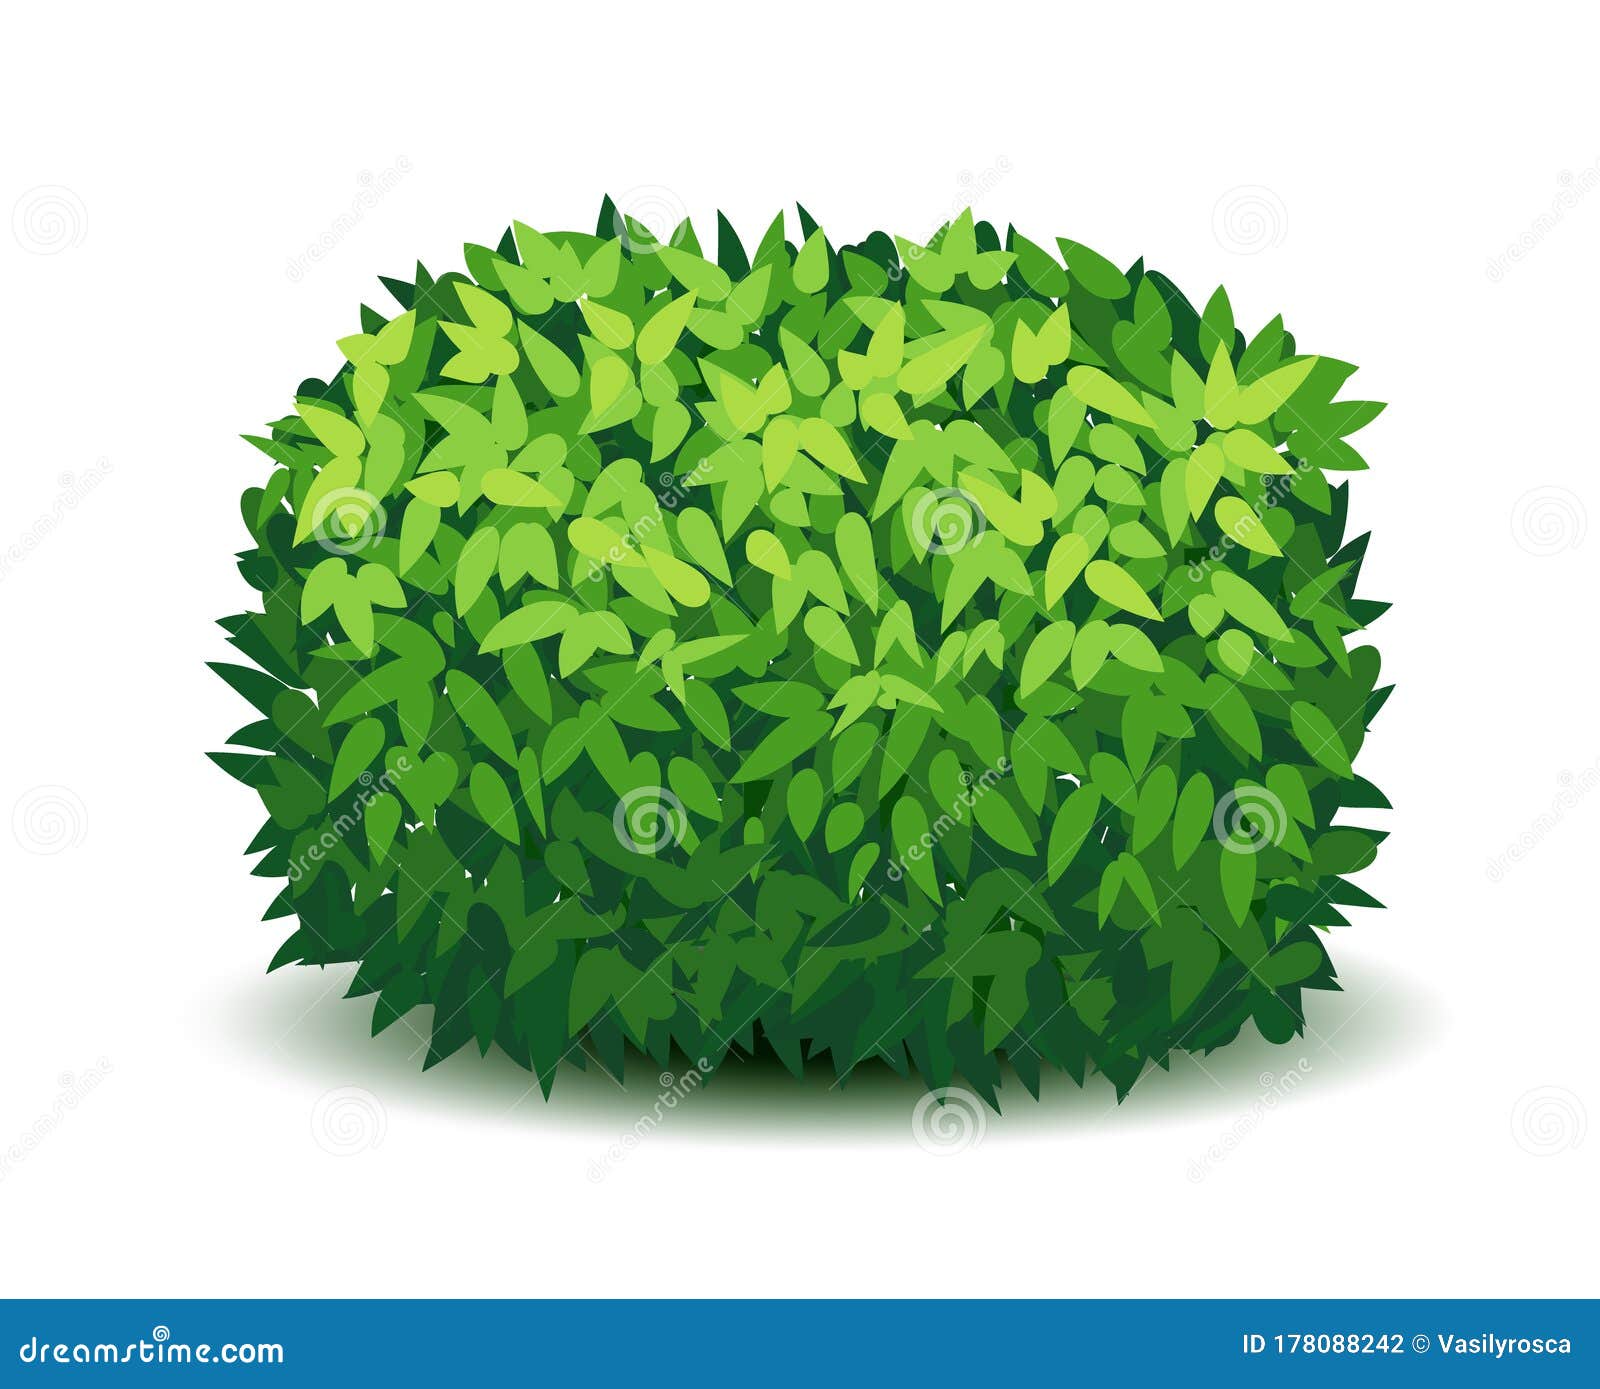 Shrubbery Cartoons, Illustrations & Vector Stock Images - 1516 Pictures